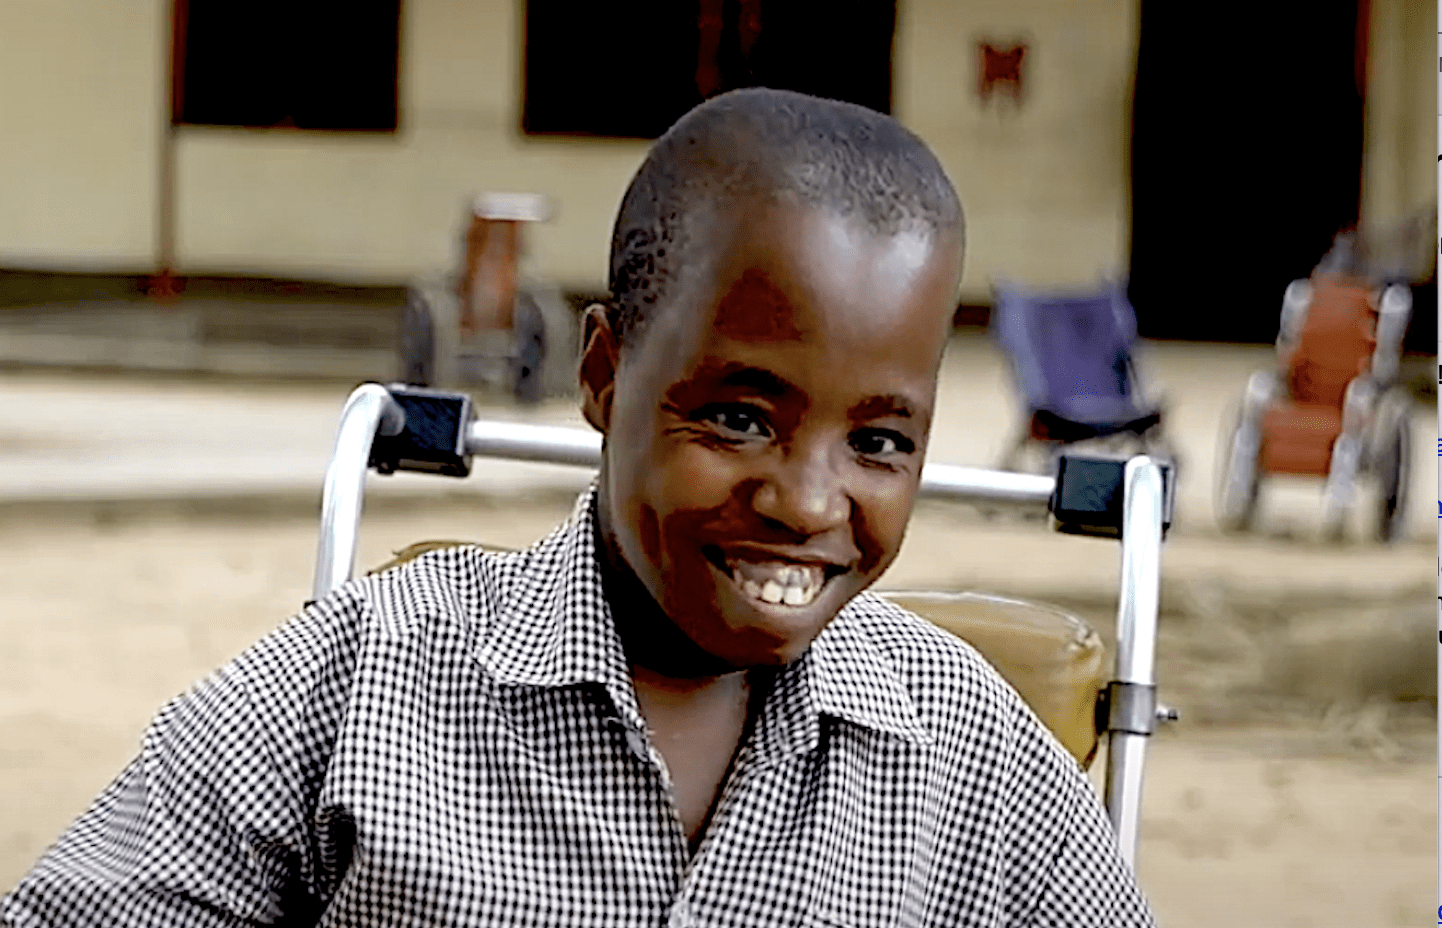 Kasere wearing gingham shirt, smiling, sitting in wheelchair.